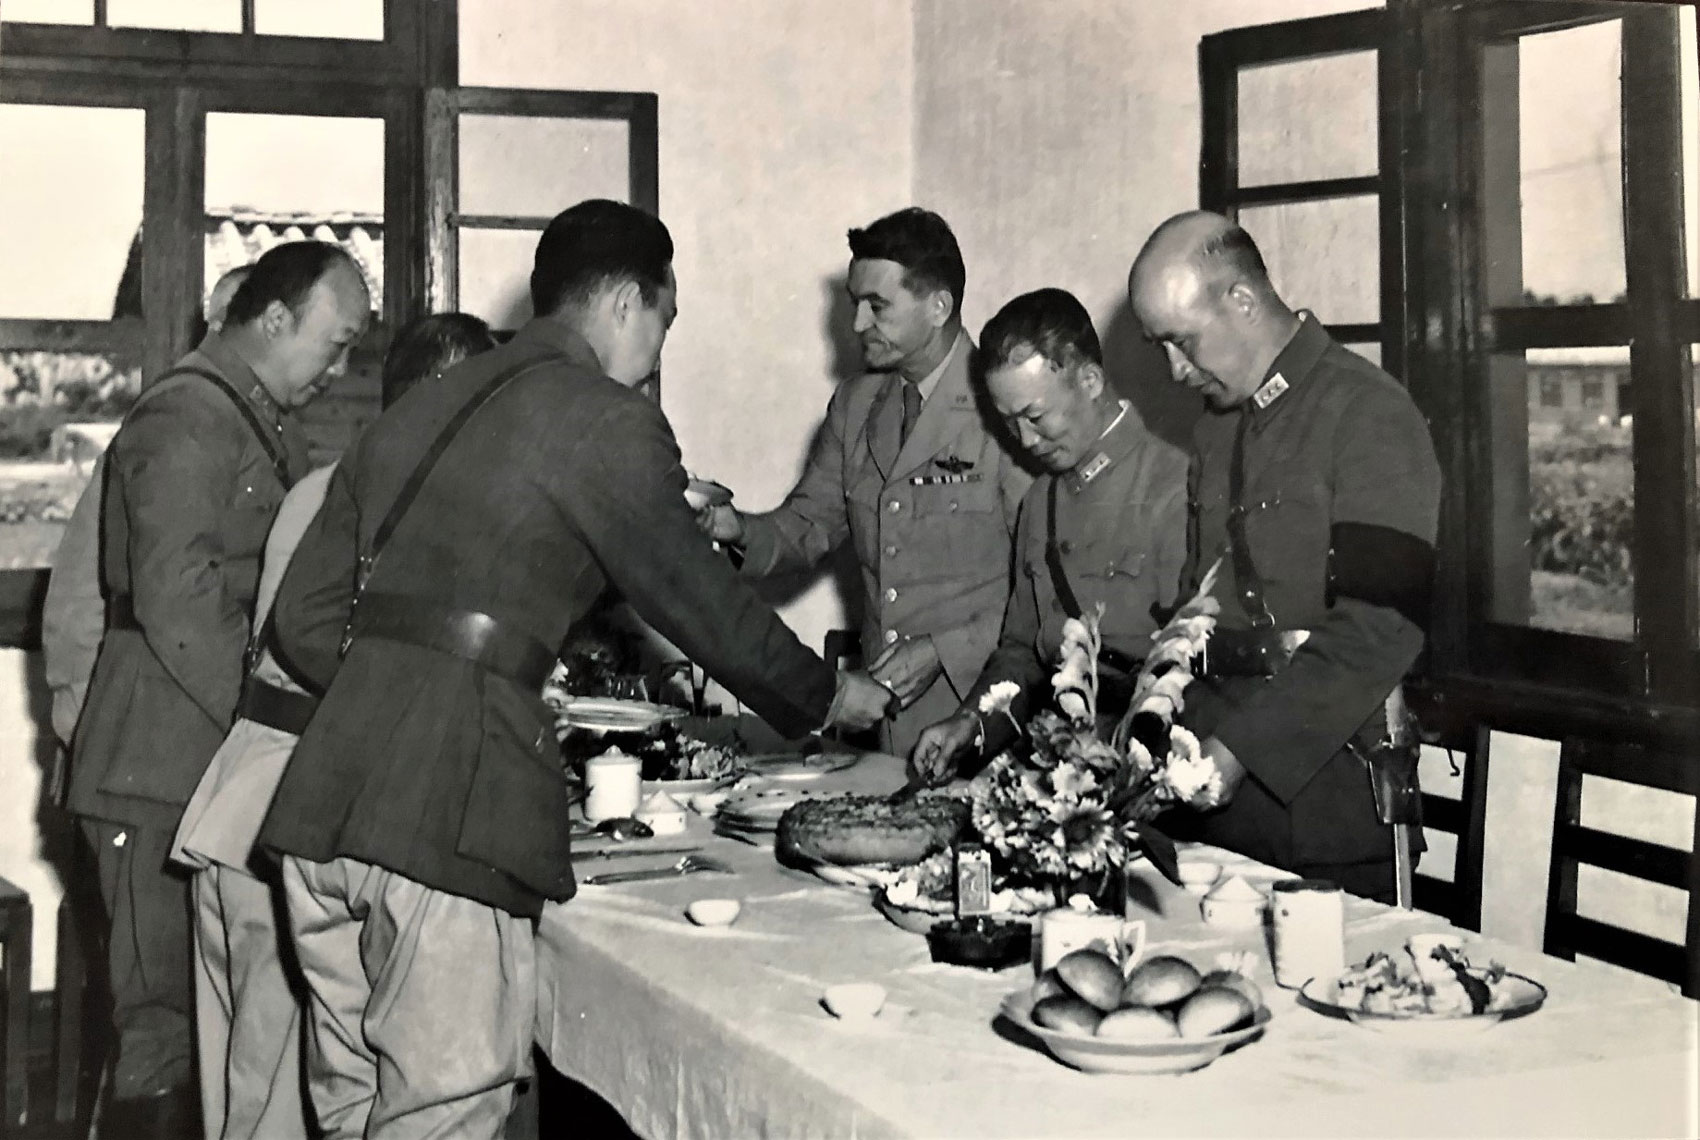 Black and white photo of a group of men in military uniform standing over a dinner table serving food.